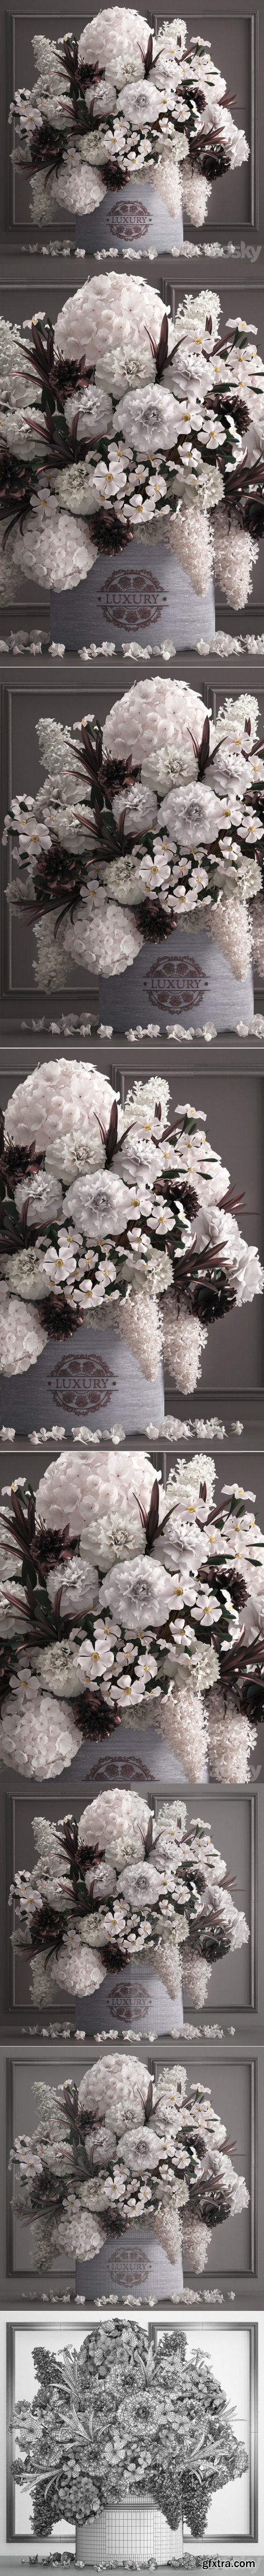 A Bouquet of Flowers in a Gift Box 88